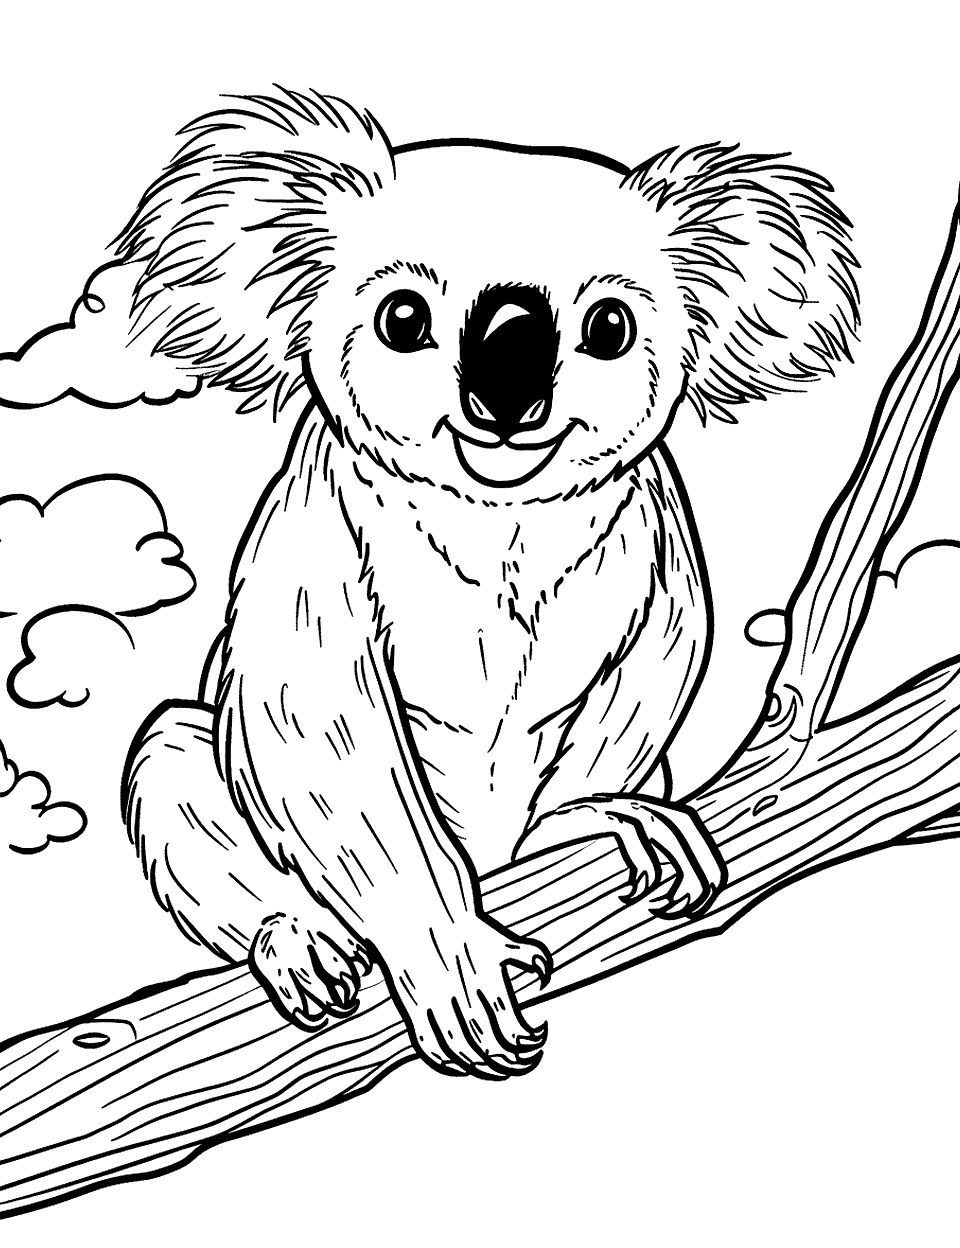 Lonely Koala on a Branch Coloring Page - A single koala sitting quietly on a branch, with a simple cloudy sky behind.